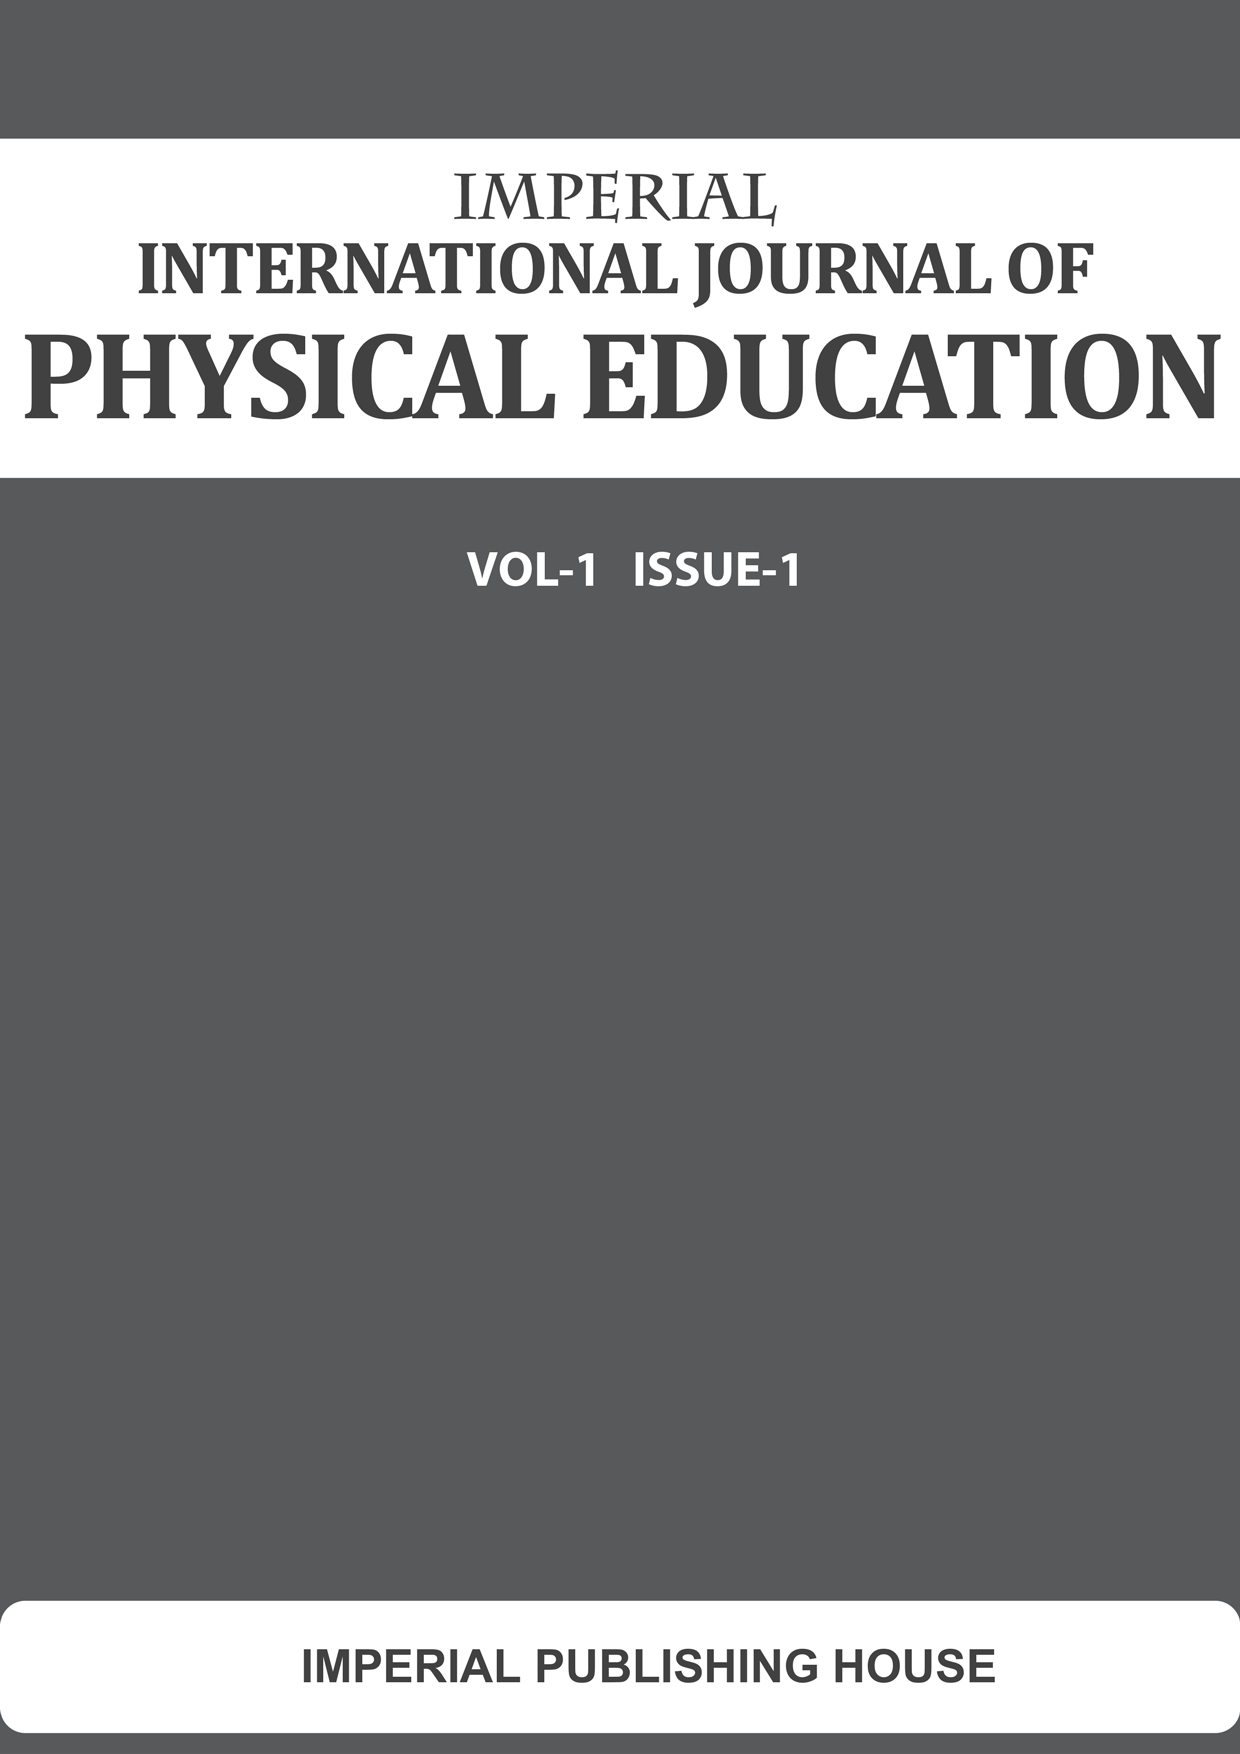 Imperial International Journal of Physical Education